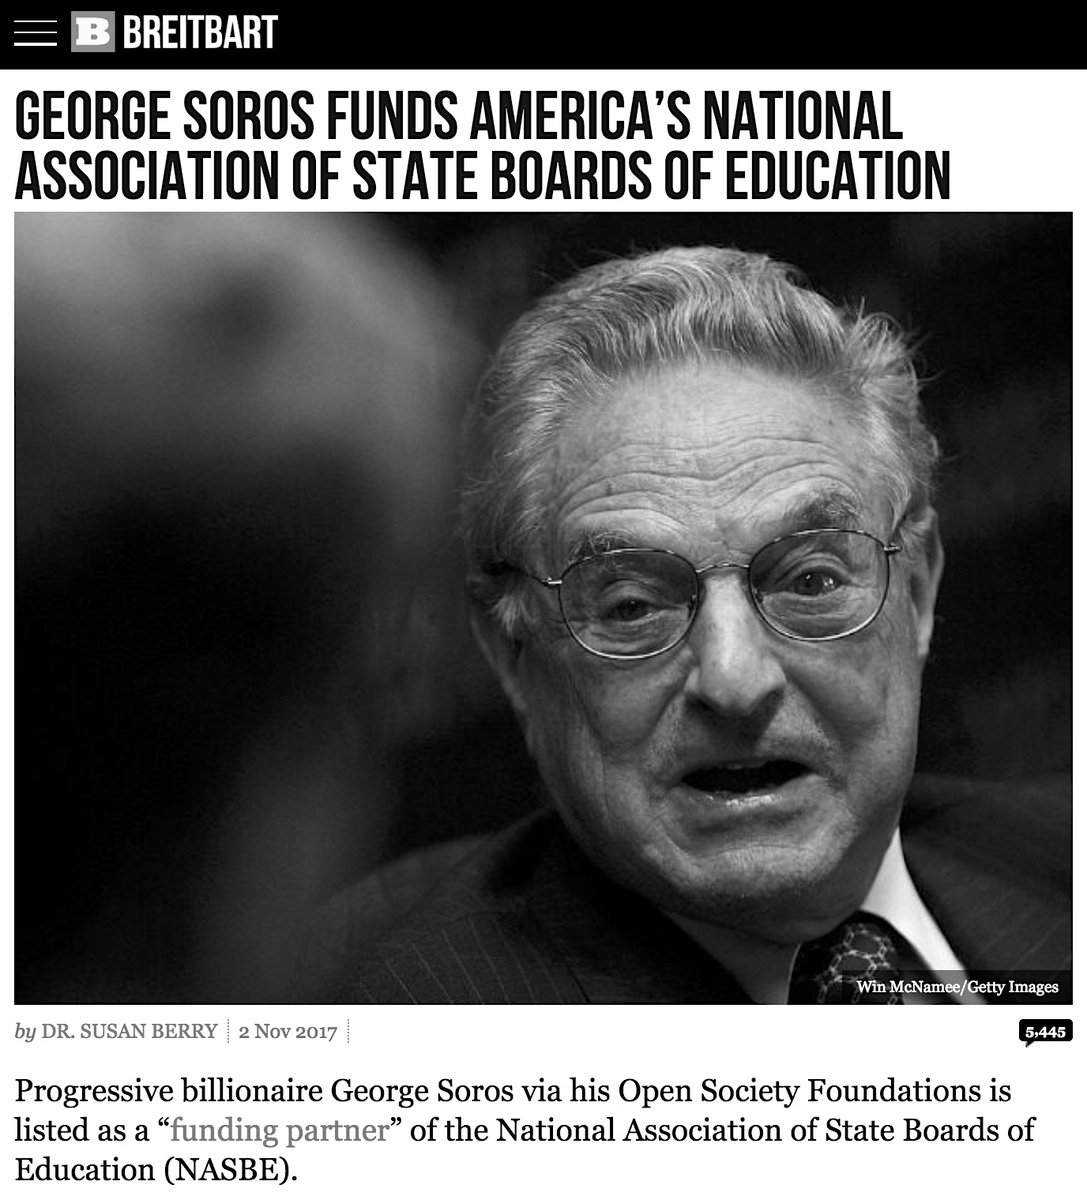 Ever Wonder How And Why All The Creepy Gender And Sexual Depiction Books Showed Up In Grade Schools All Over America? The National Association Of State Boards Of Education Is Being Funded By Soros’s Foundation, The Bill And Melinda Gates Foundation – Primary Private Funder Of…